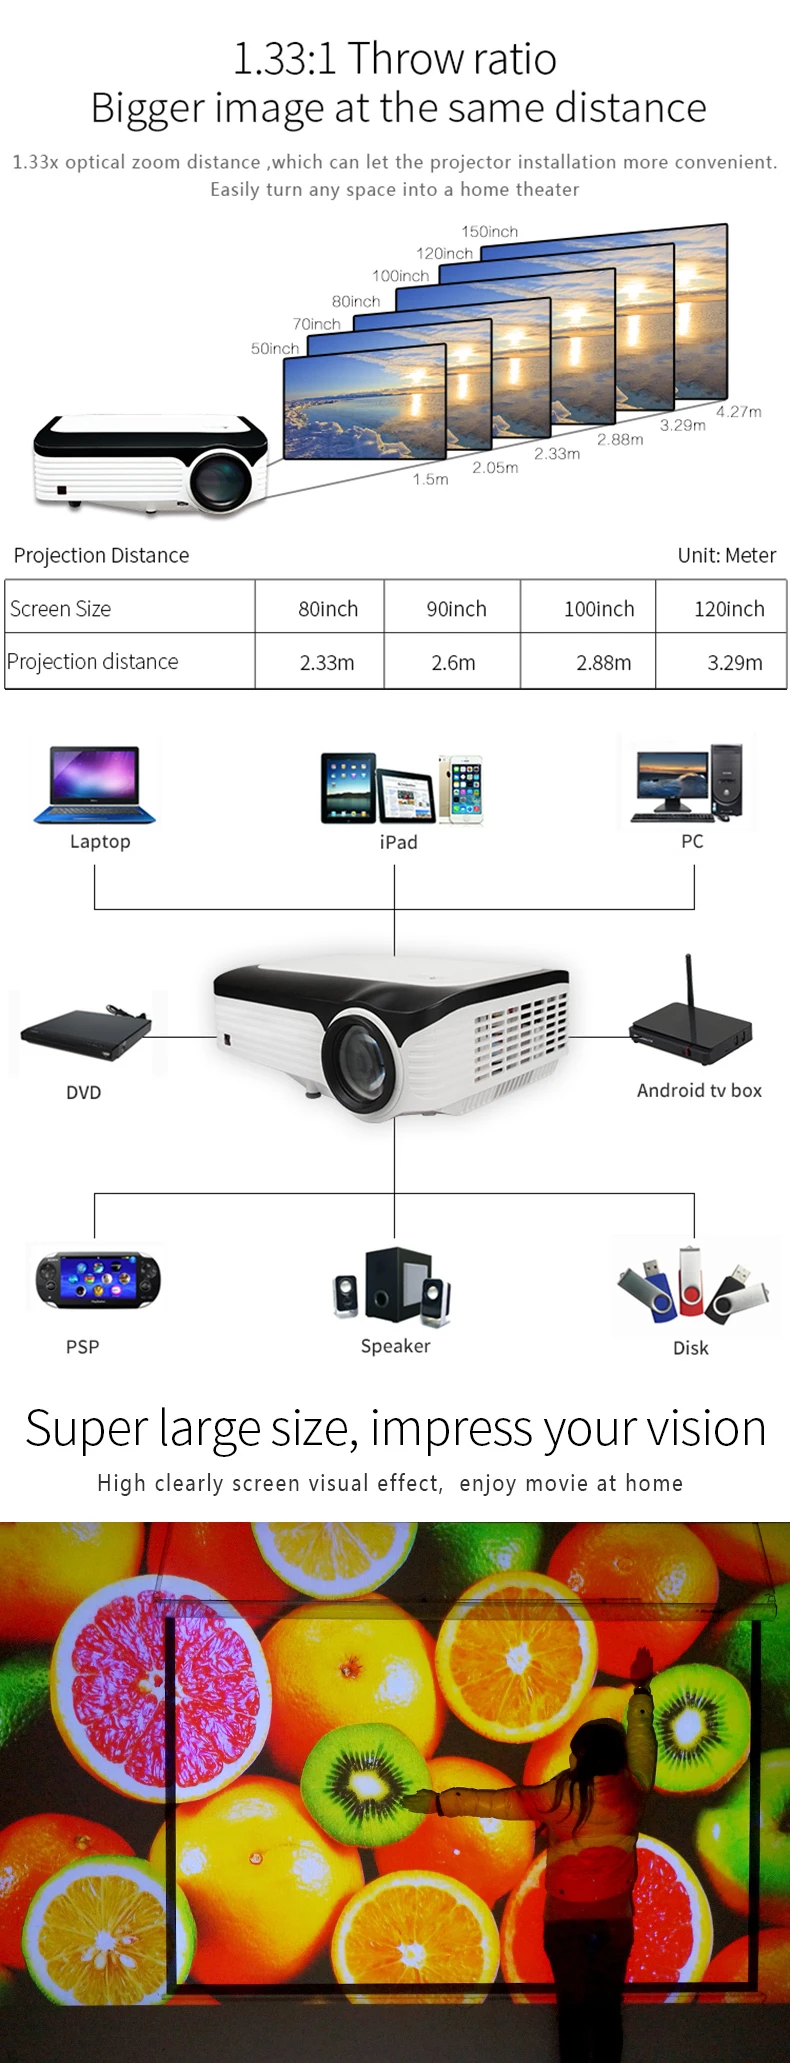 4-080p-projector_android.jpg